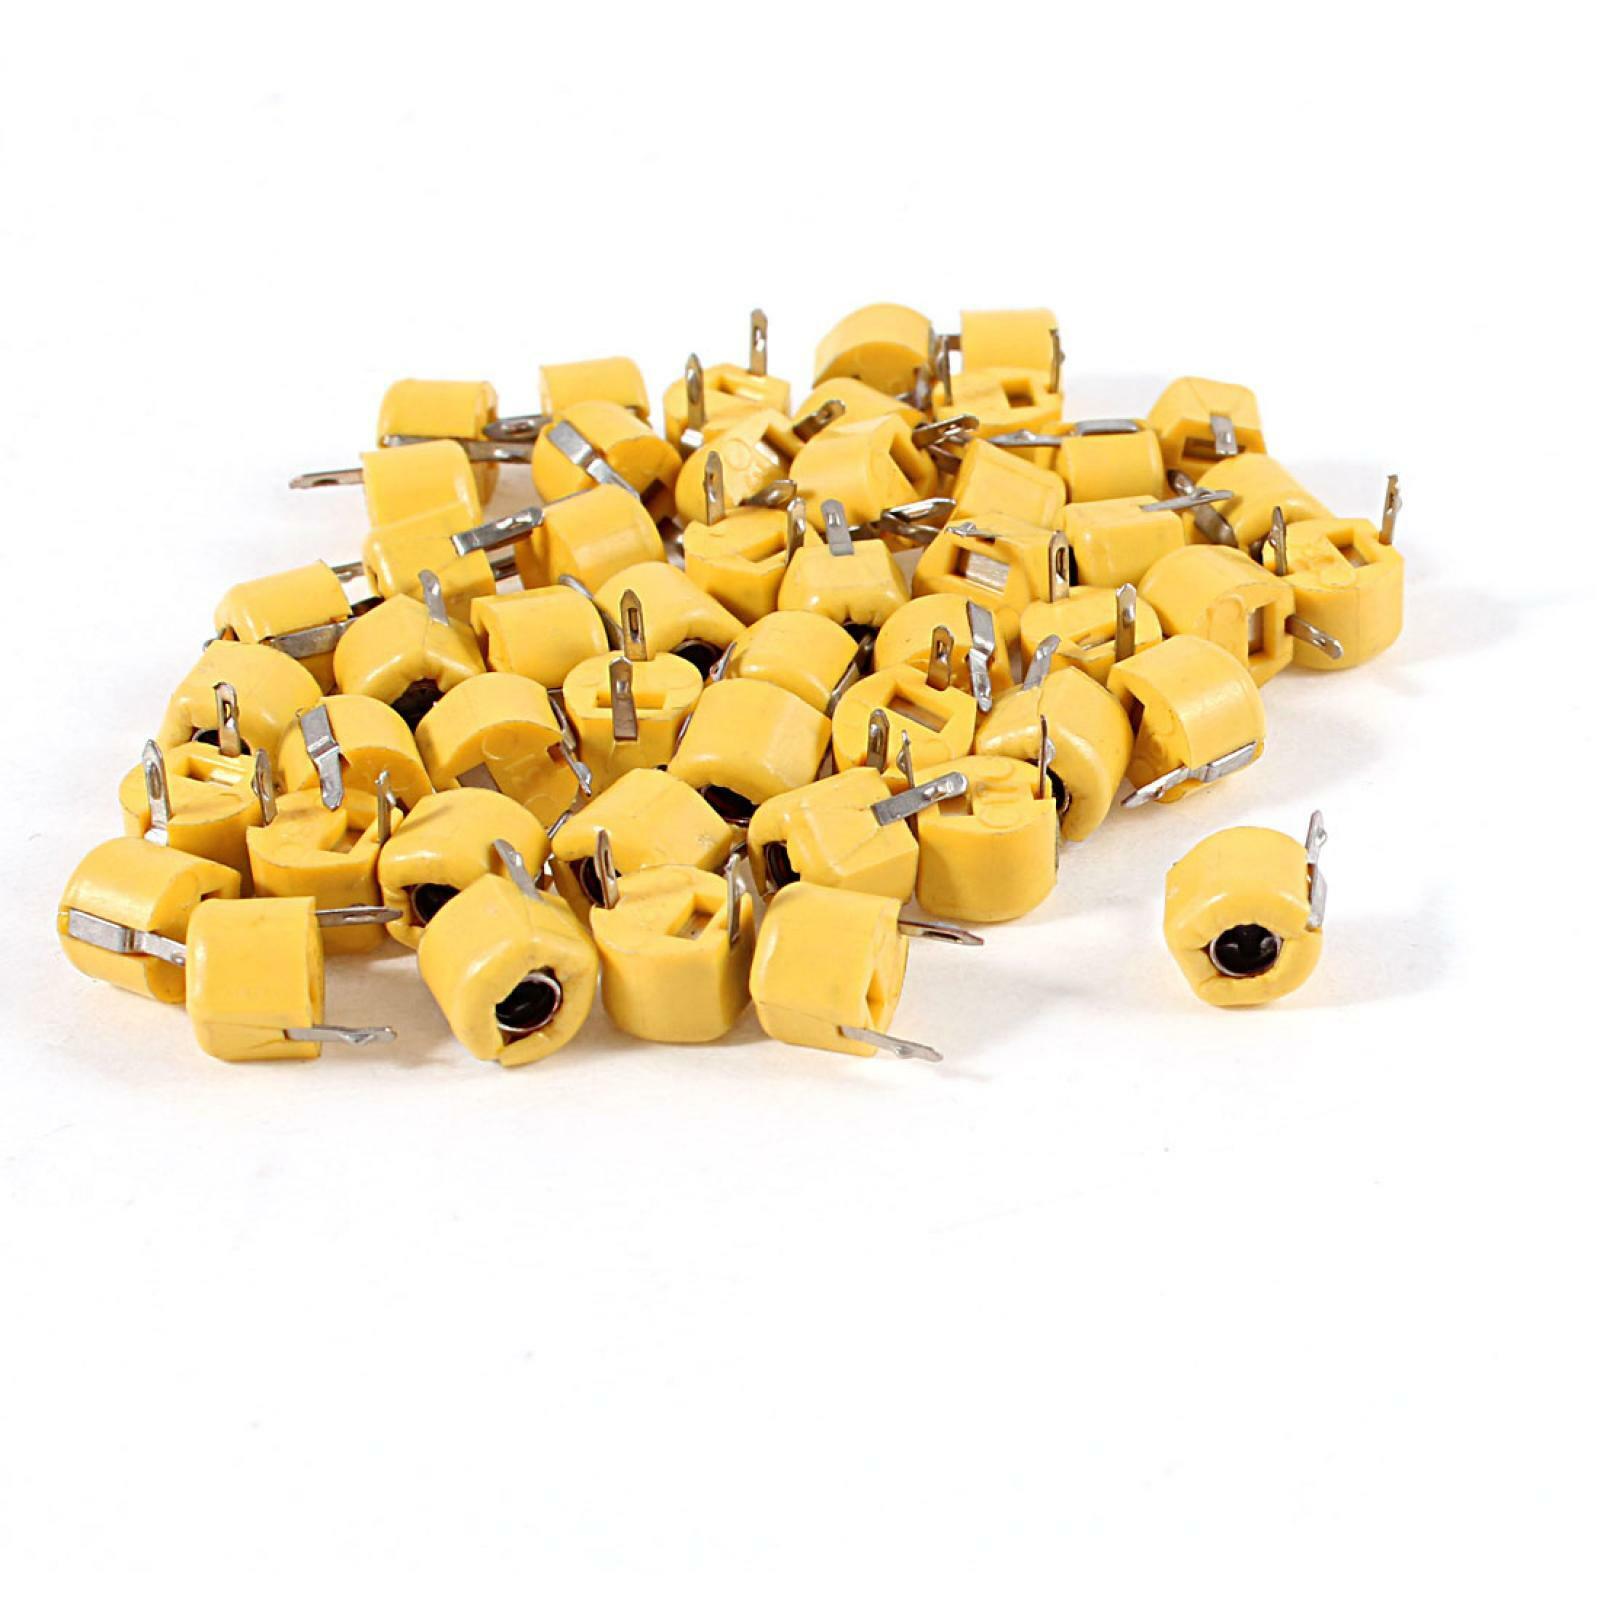 50 Pcs 6mm Through Hole Yellow Trimmer 40pF Variable Ranking TOP3 Capacitors free shipping